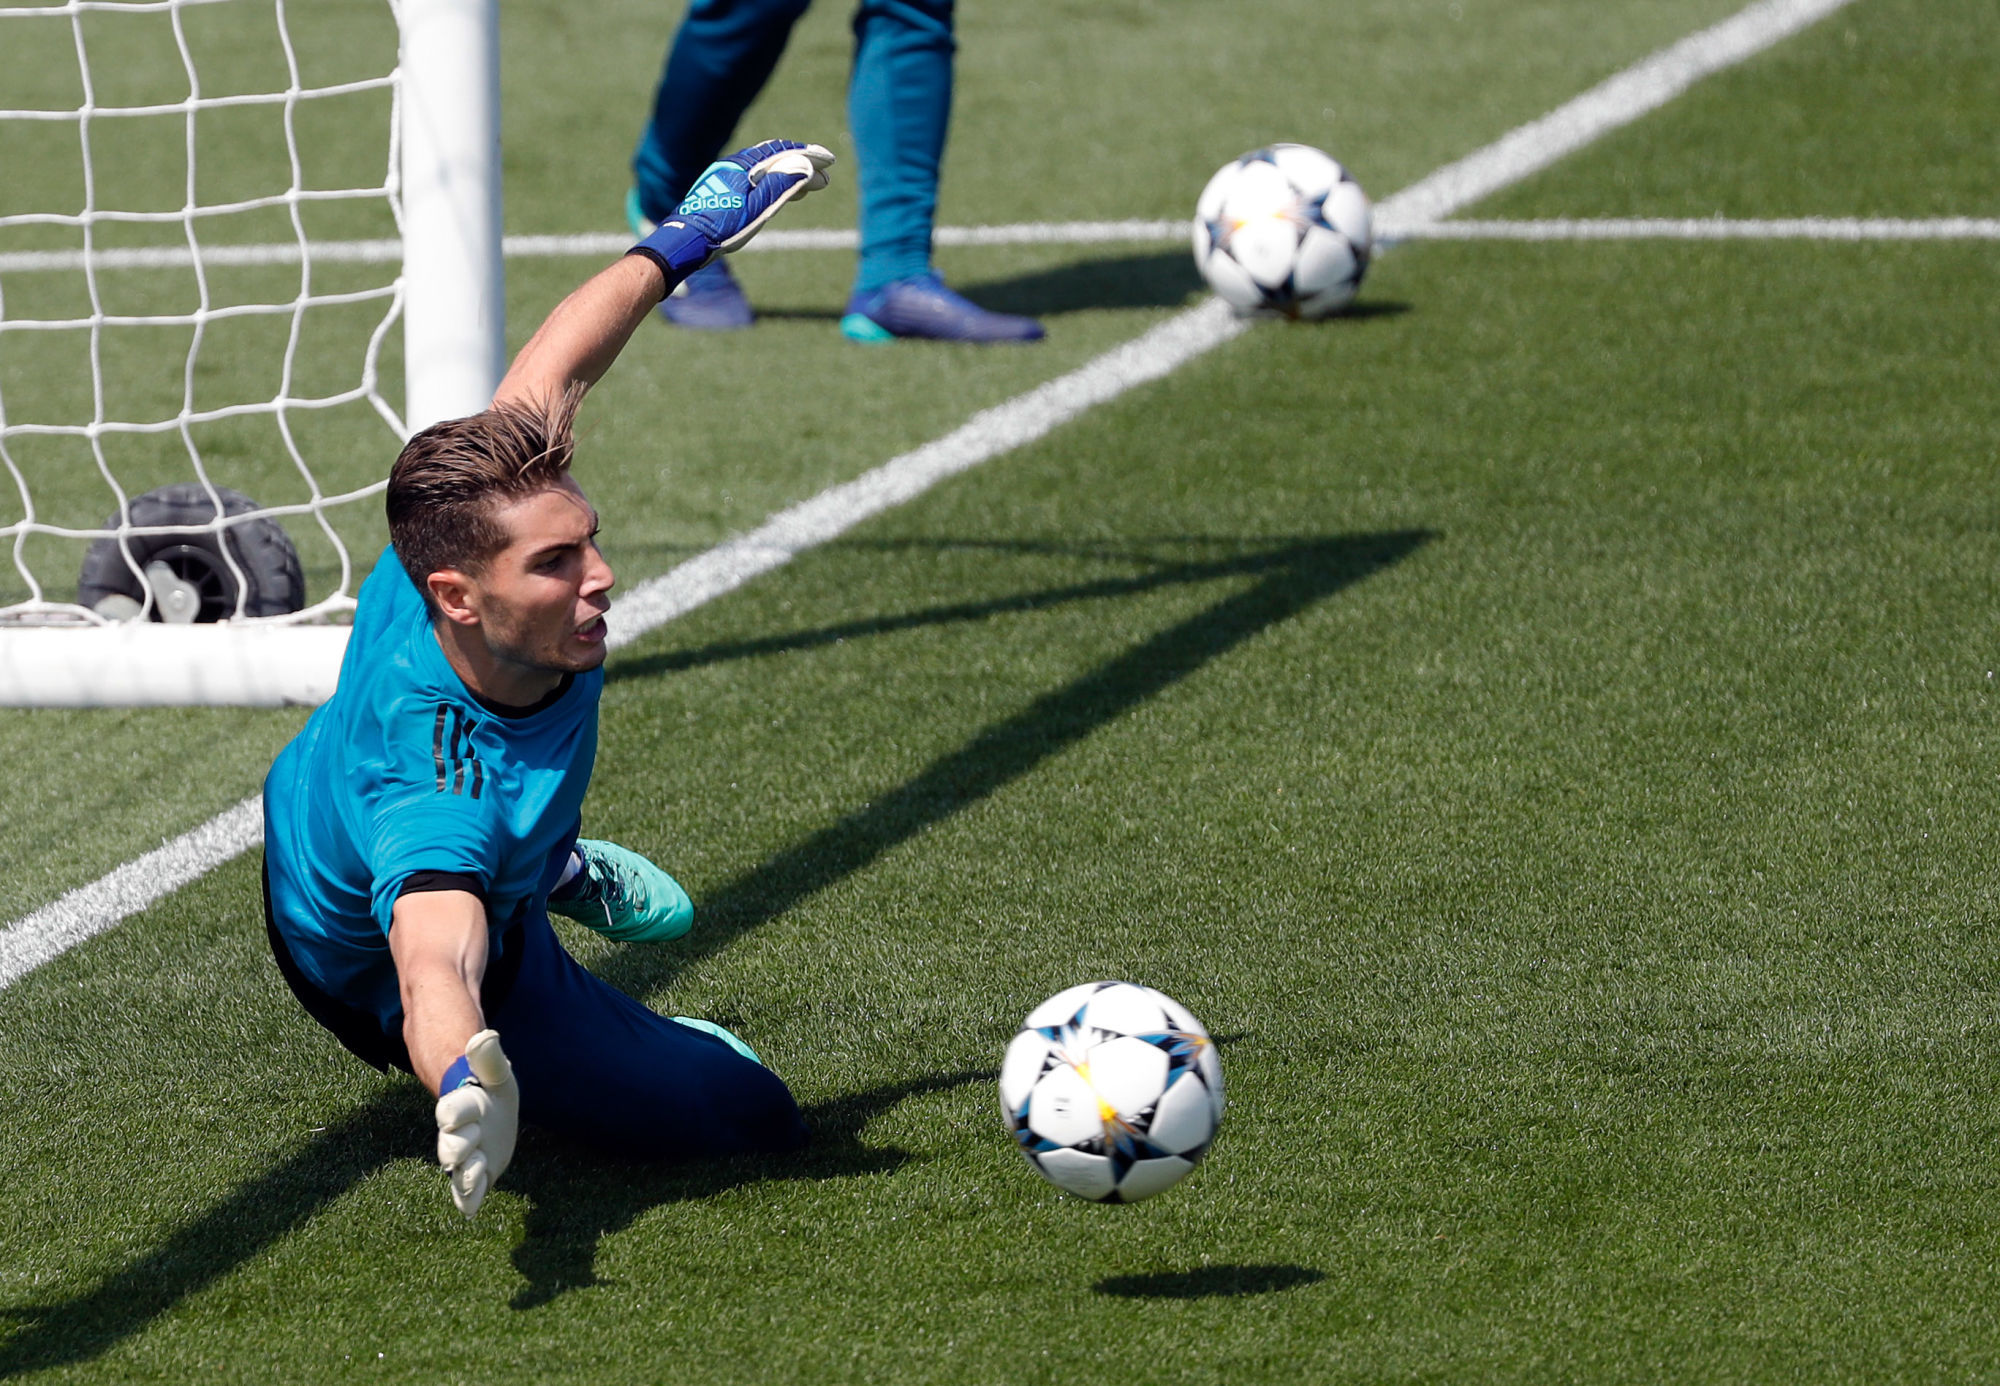 Luca Zidane during the Real Madrid training session on 22th May 2018 Photo : Marca / Icon Sport